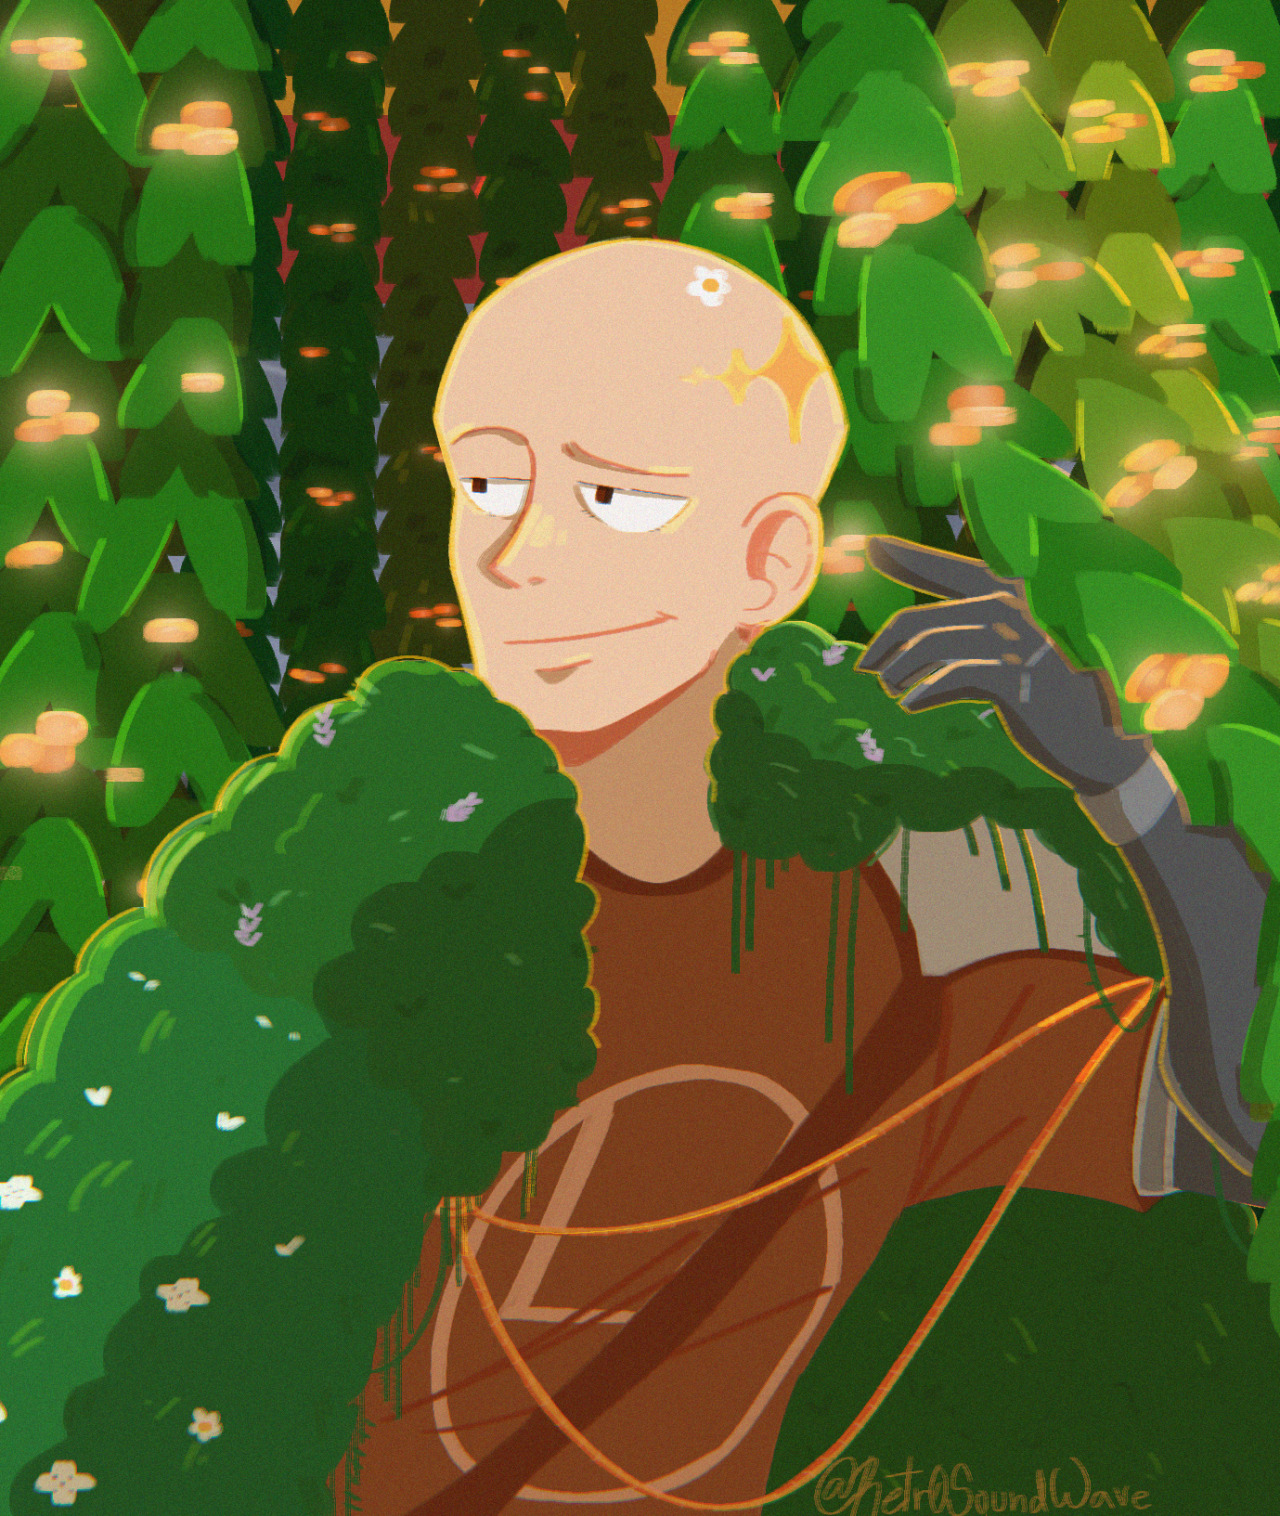 A drawing of Fit wearing the same clothes as his minecraft skin. However, the green cape his cubito usual wears is imagined as a mossy cape. He is leaning on a wall in a lush cave full of glowberry vines.